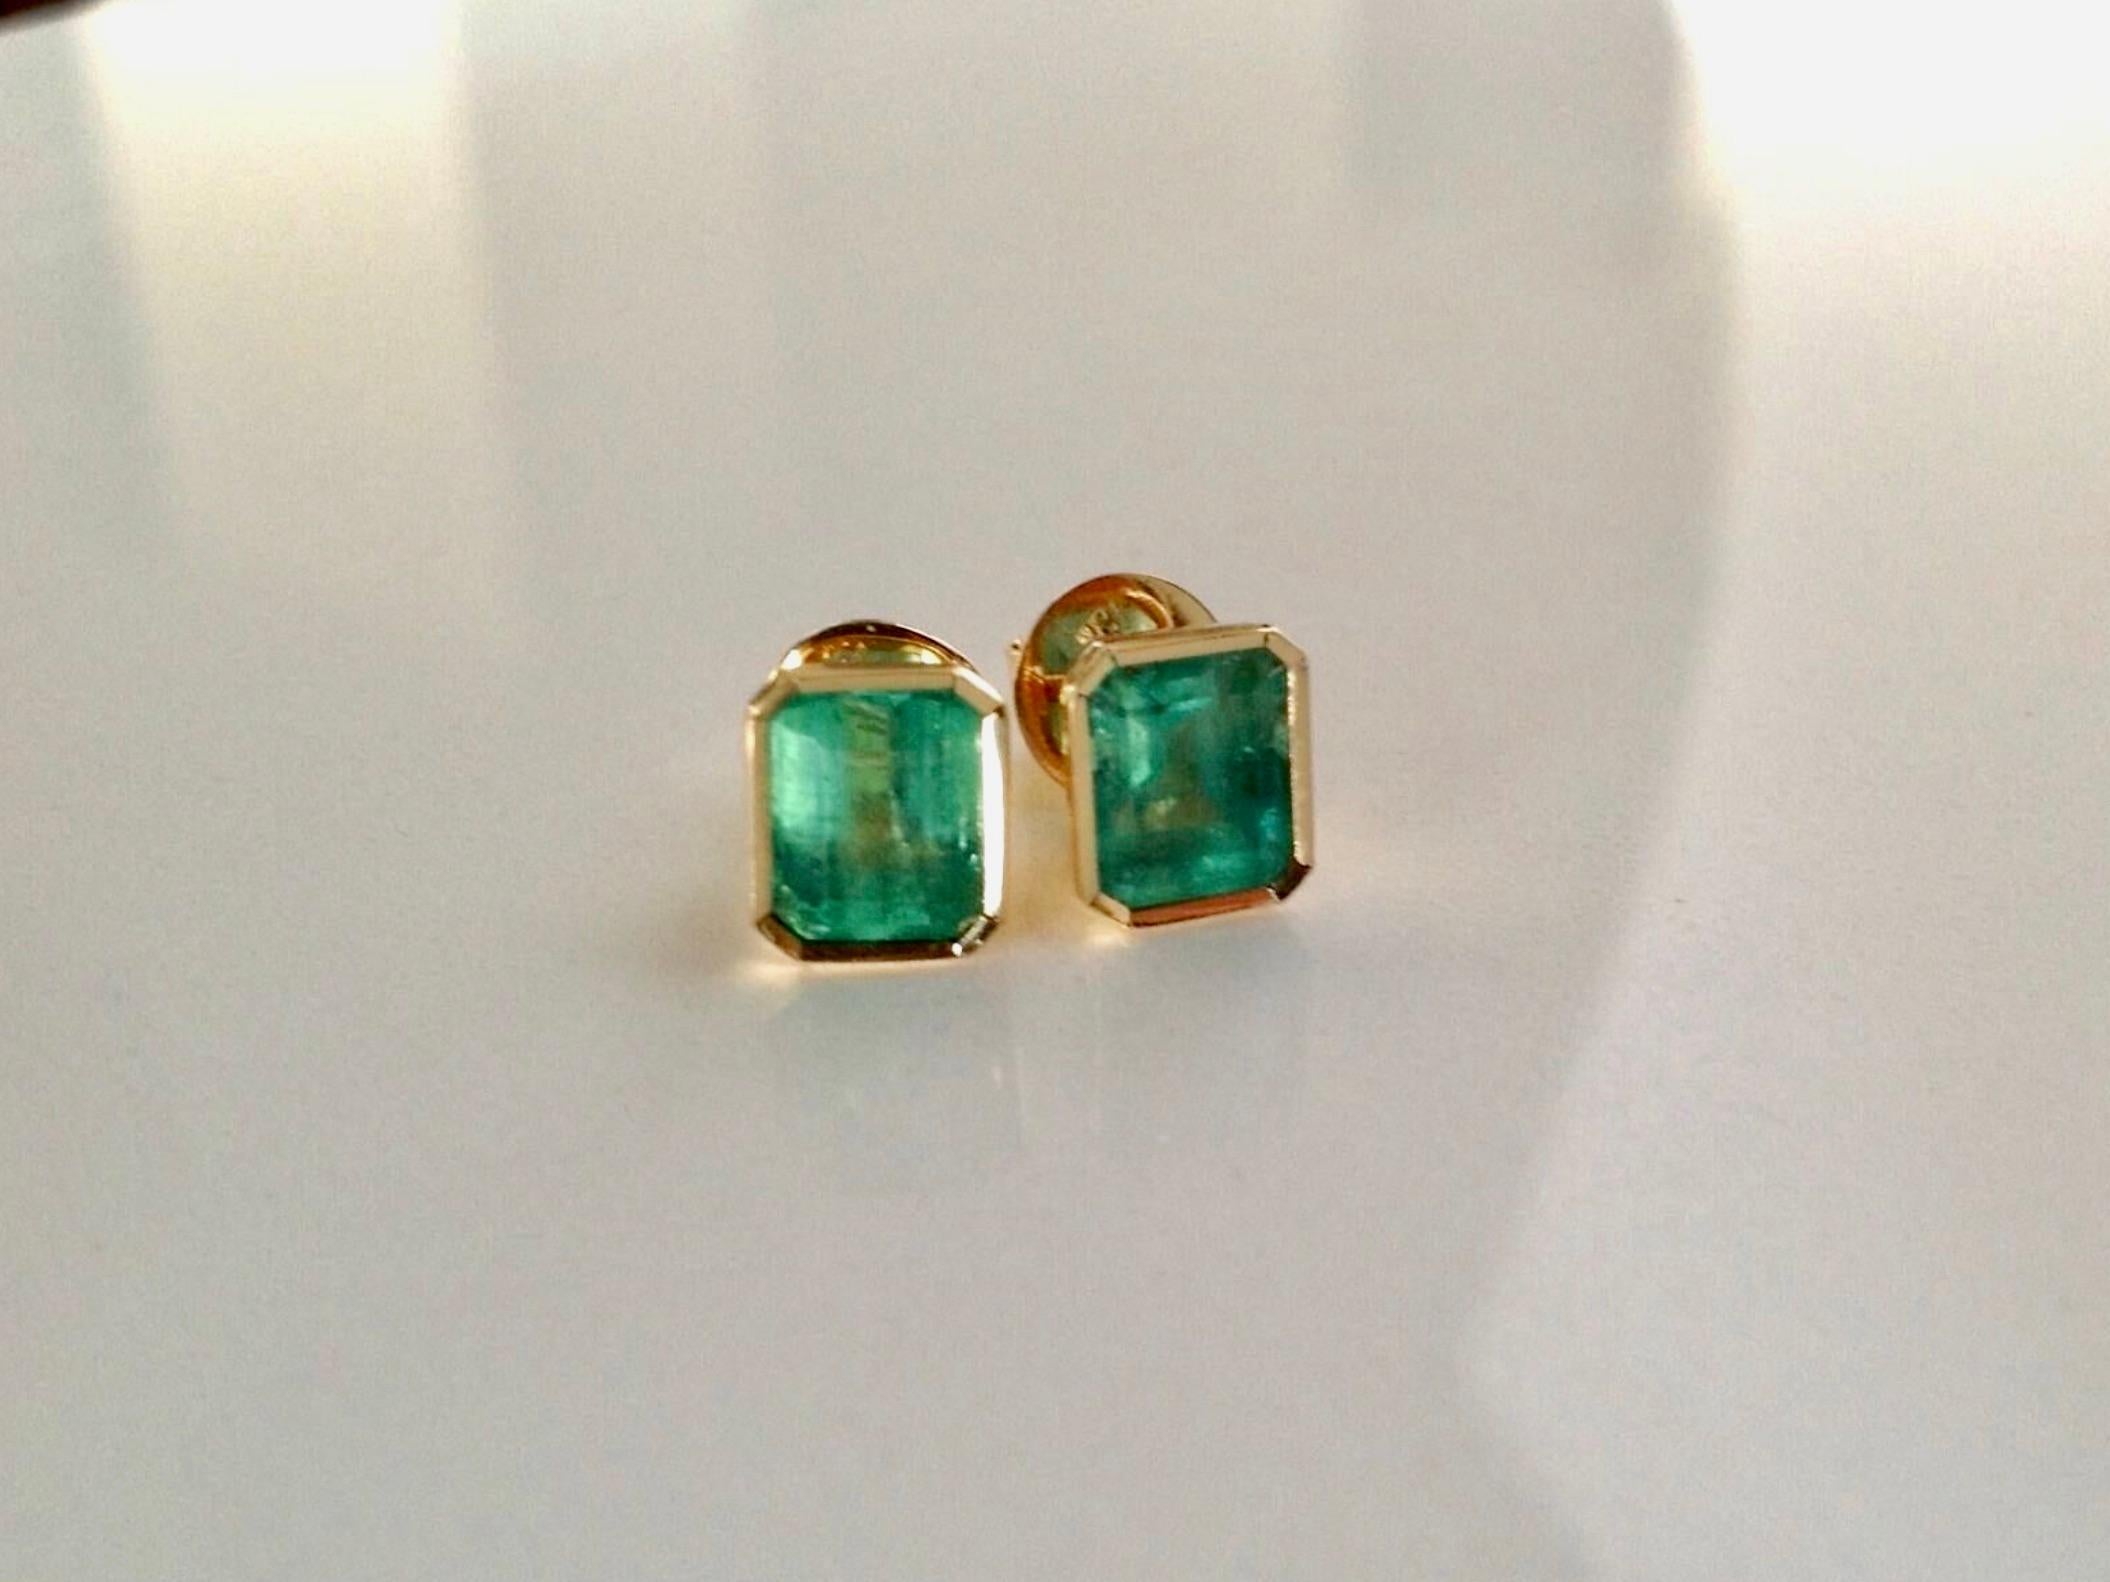 Primary Stones: 100% Natural Colombian Emeralds
Shape or Cut : Emerald Cut
Average Color/Clarity : AAA Medium Green/ Clarity, VS
Total Weight Emeralds: 2.47 Carats (2 emeralds)
Second Stones: None
Total Gemstones Weight: 2.47 Carats
Style: Studs/